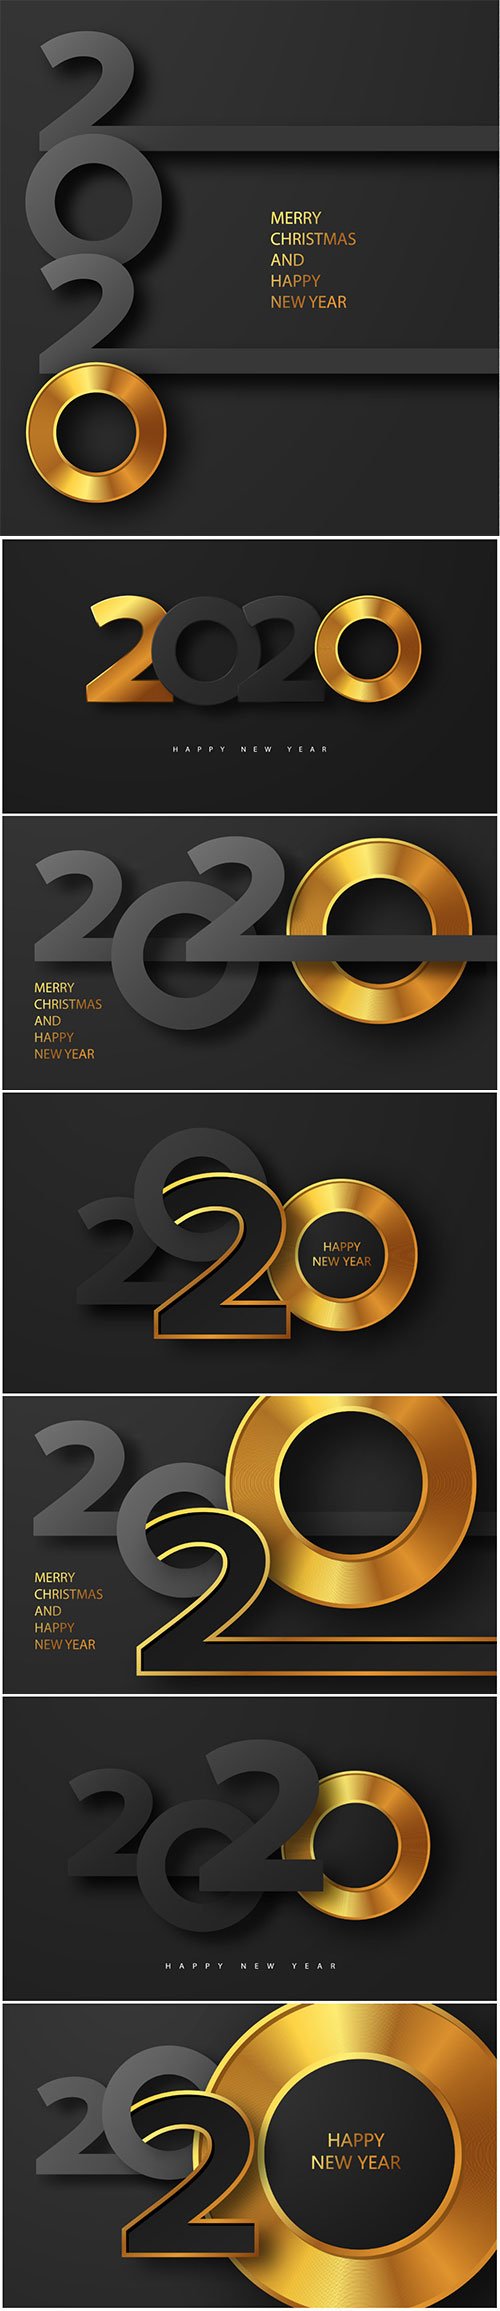 Merry Christmas and Happy new year 2020 banner with golden luxury text